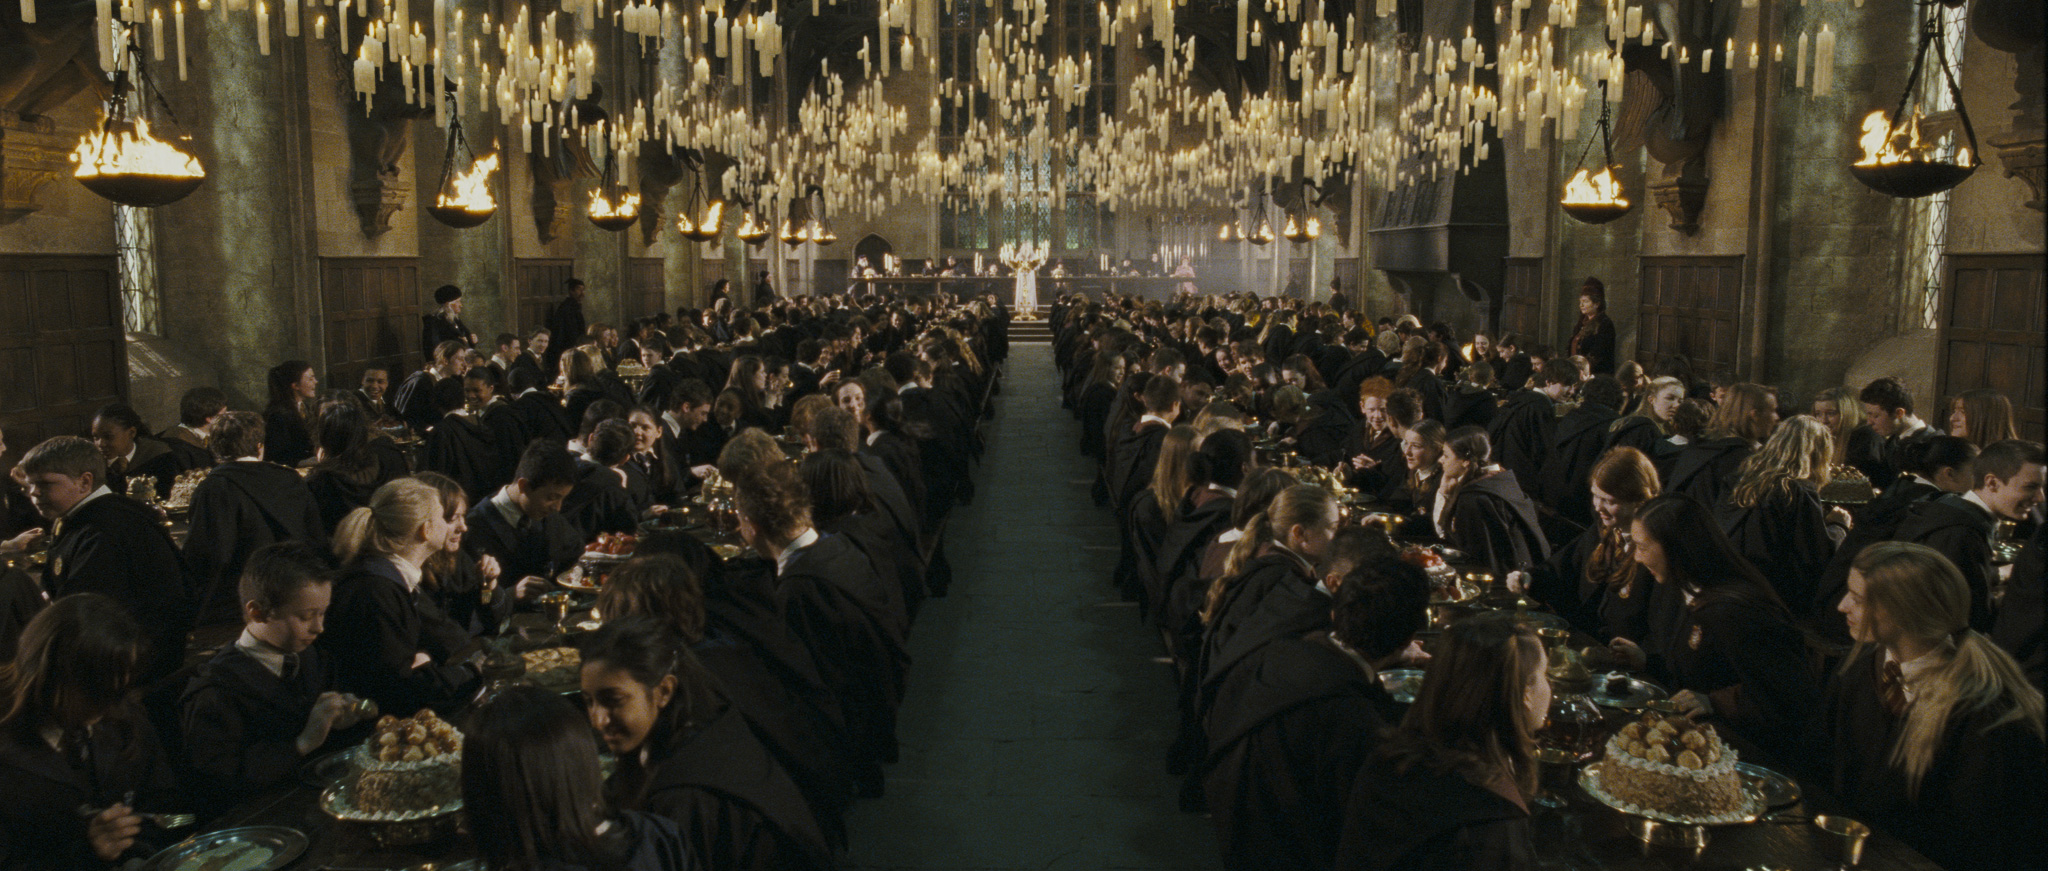 Opening Feast 1995/1996 (All Hogwarts Student and Staff)  043_fn_001a_v08-0131_pr-lg